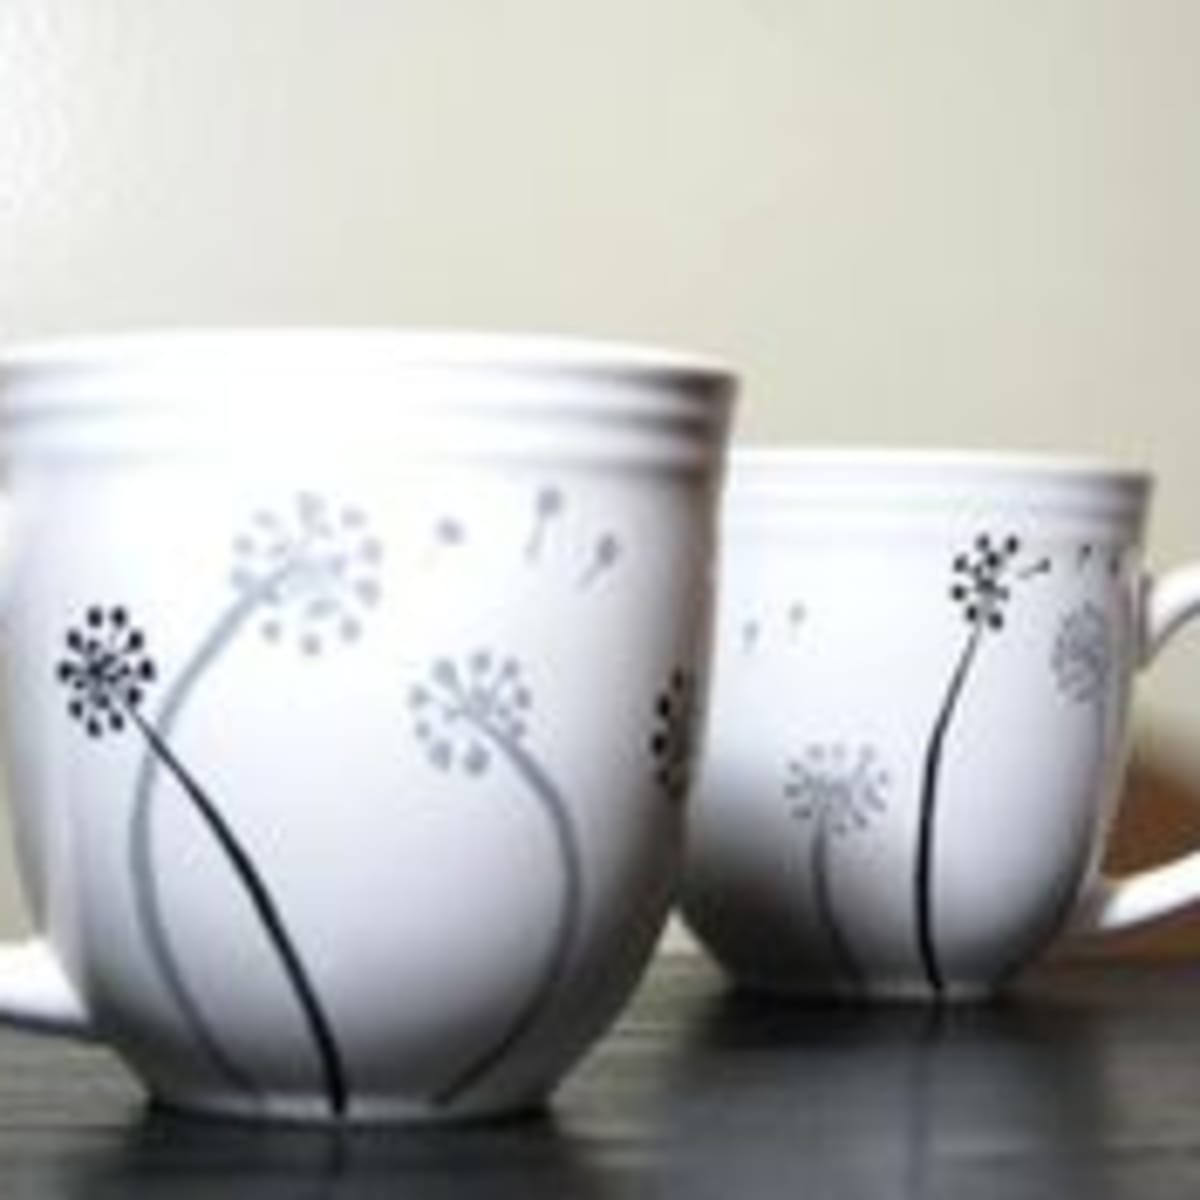 How To Decorate Coffee Mugs Feltmagnet Crafts